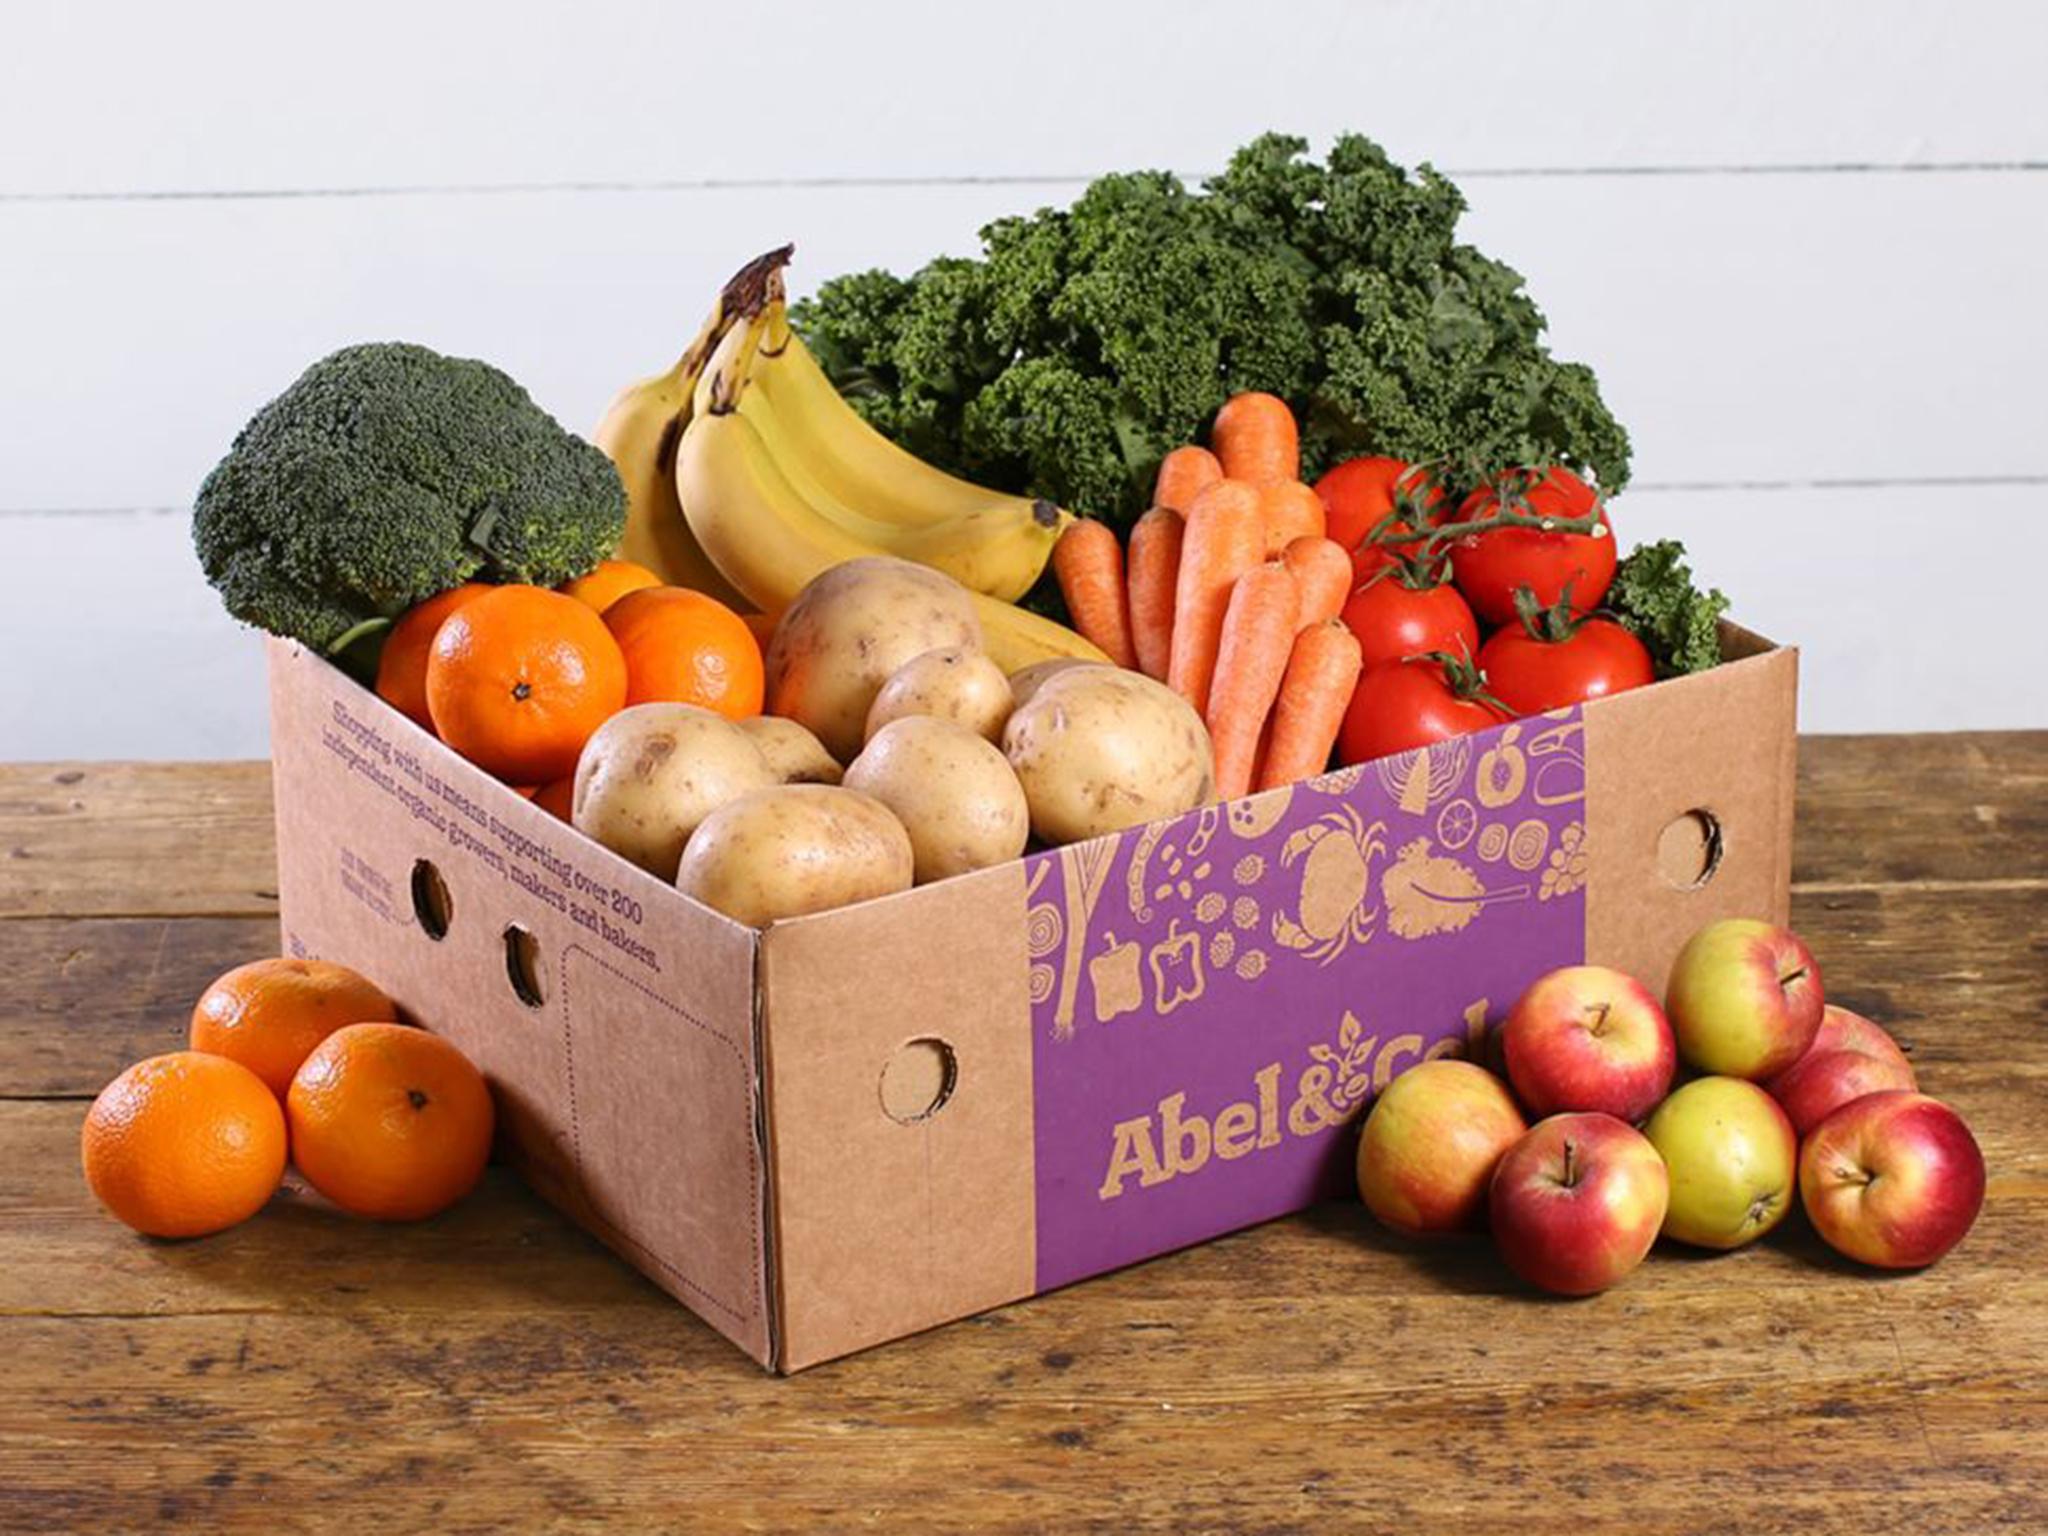 Abel and Cole small fruit and veg box  indybest 